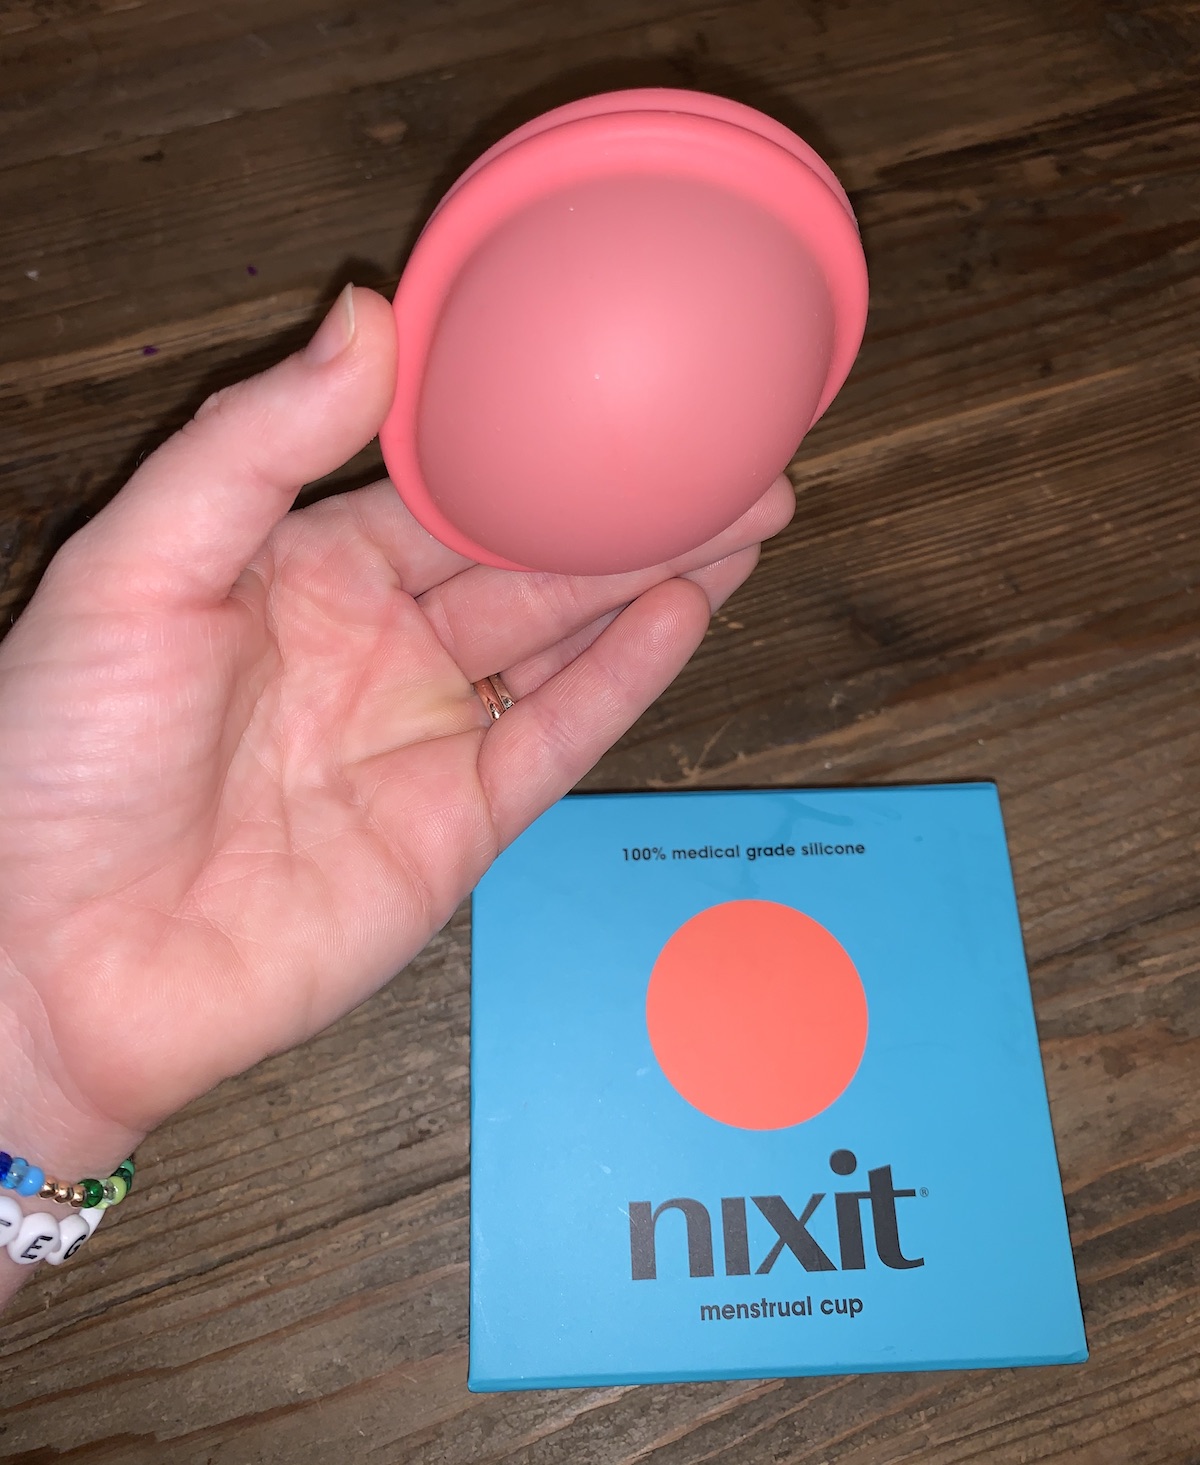 Nixit-Menstrual-Cup-Review Nixit Menstrual Cup | Personal Review and Cup Comparisons